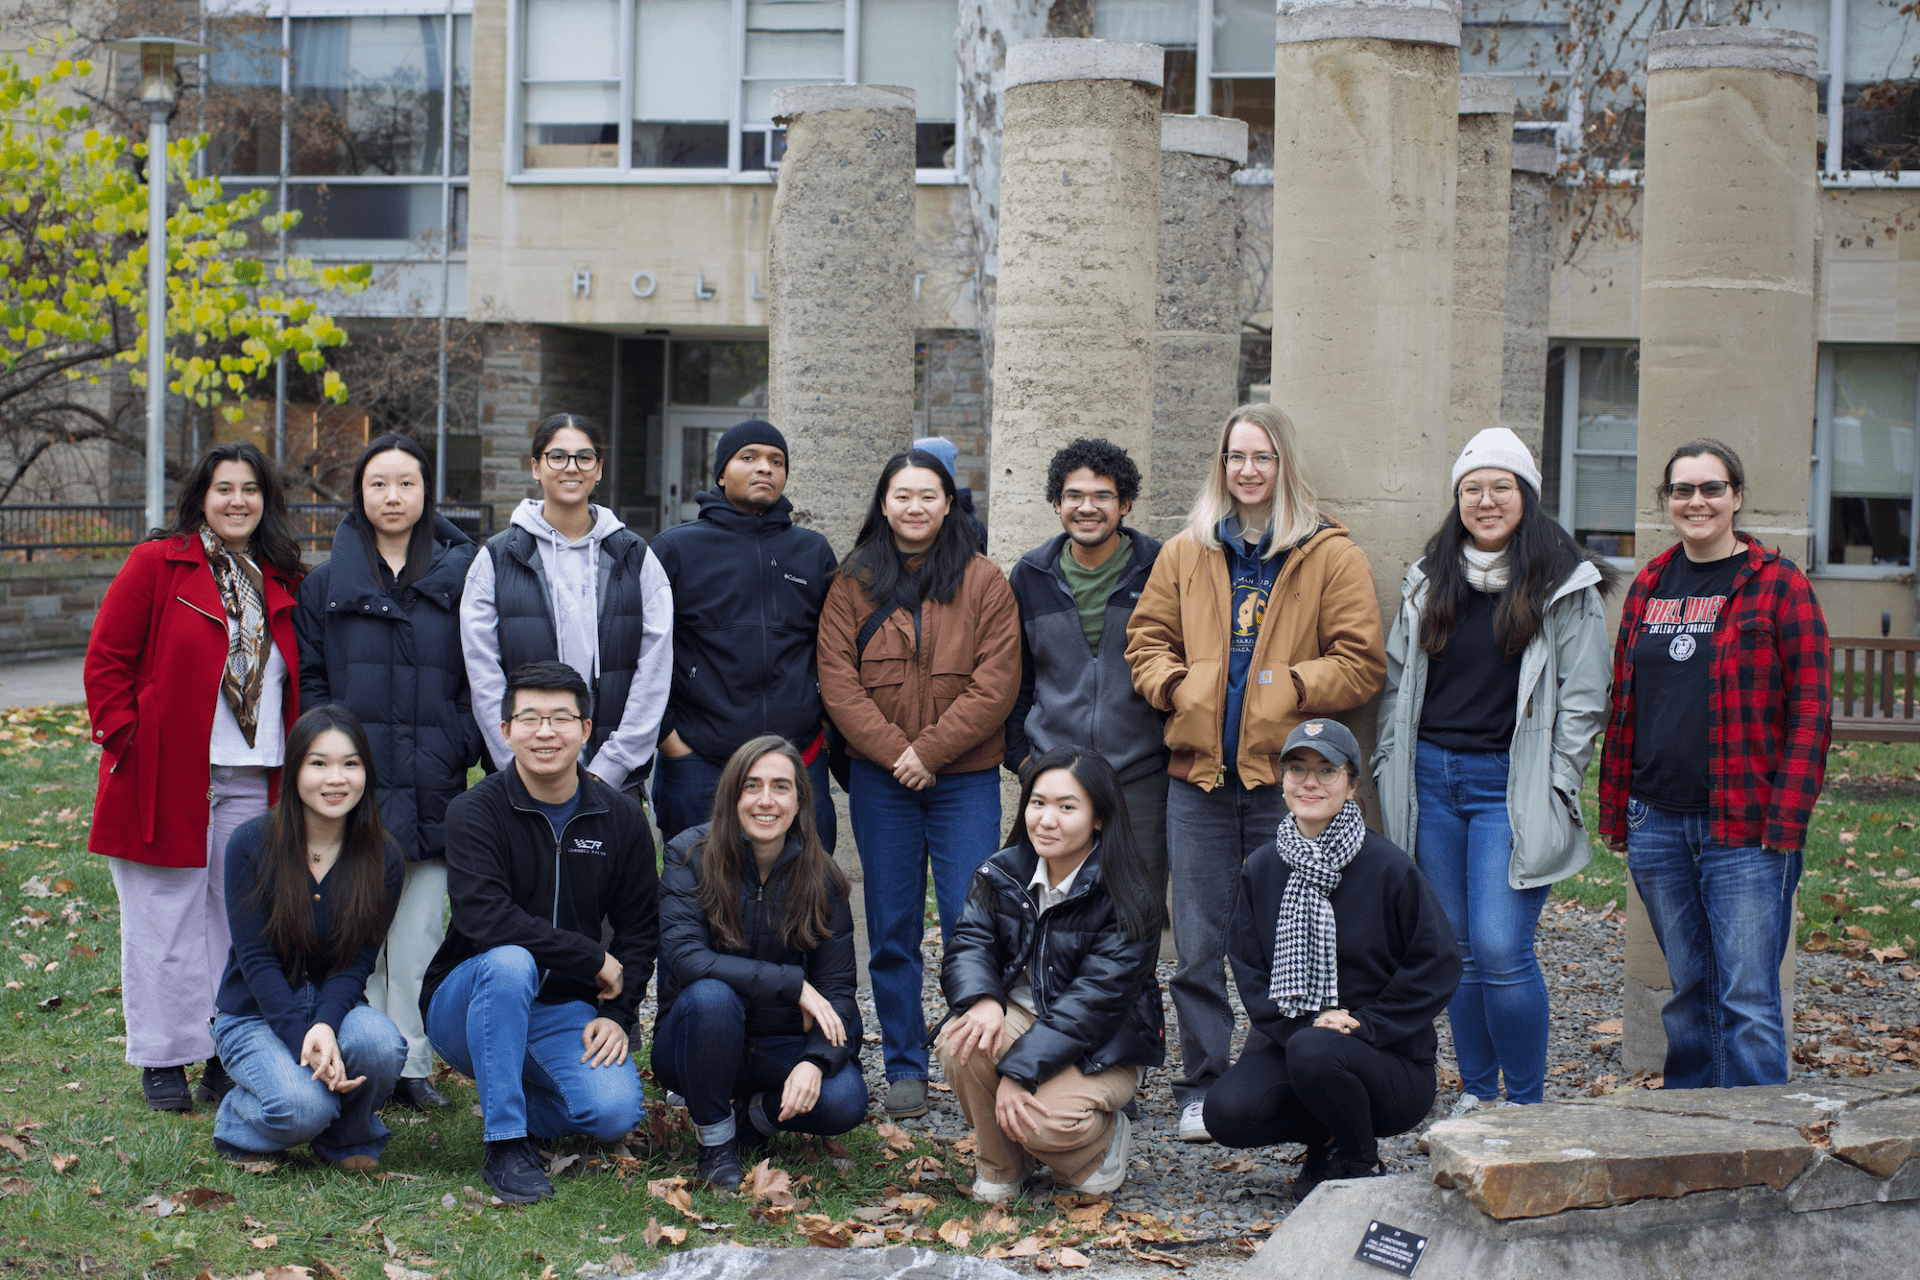 Cape Crystal research group at Cornell University